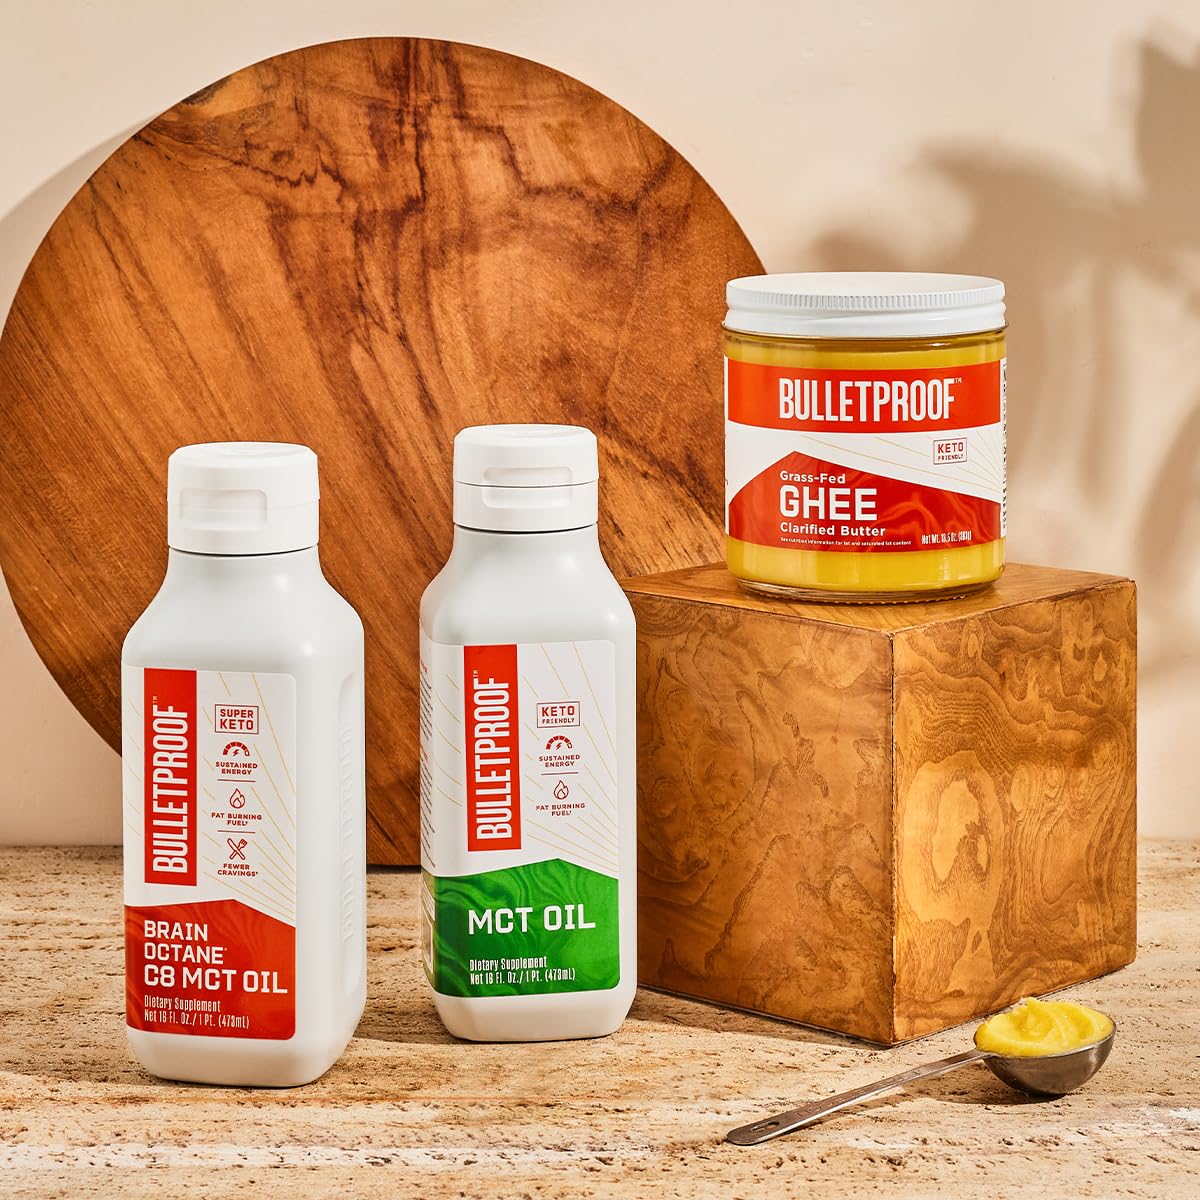 Bulletproof MCT Oil Made with C10 and C8 Oil, 16 Ounces, Keto Supplement for Sustained Energy